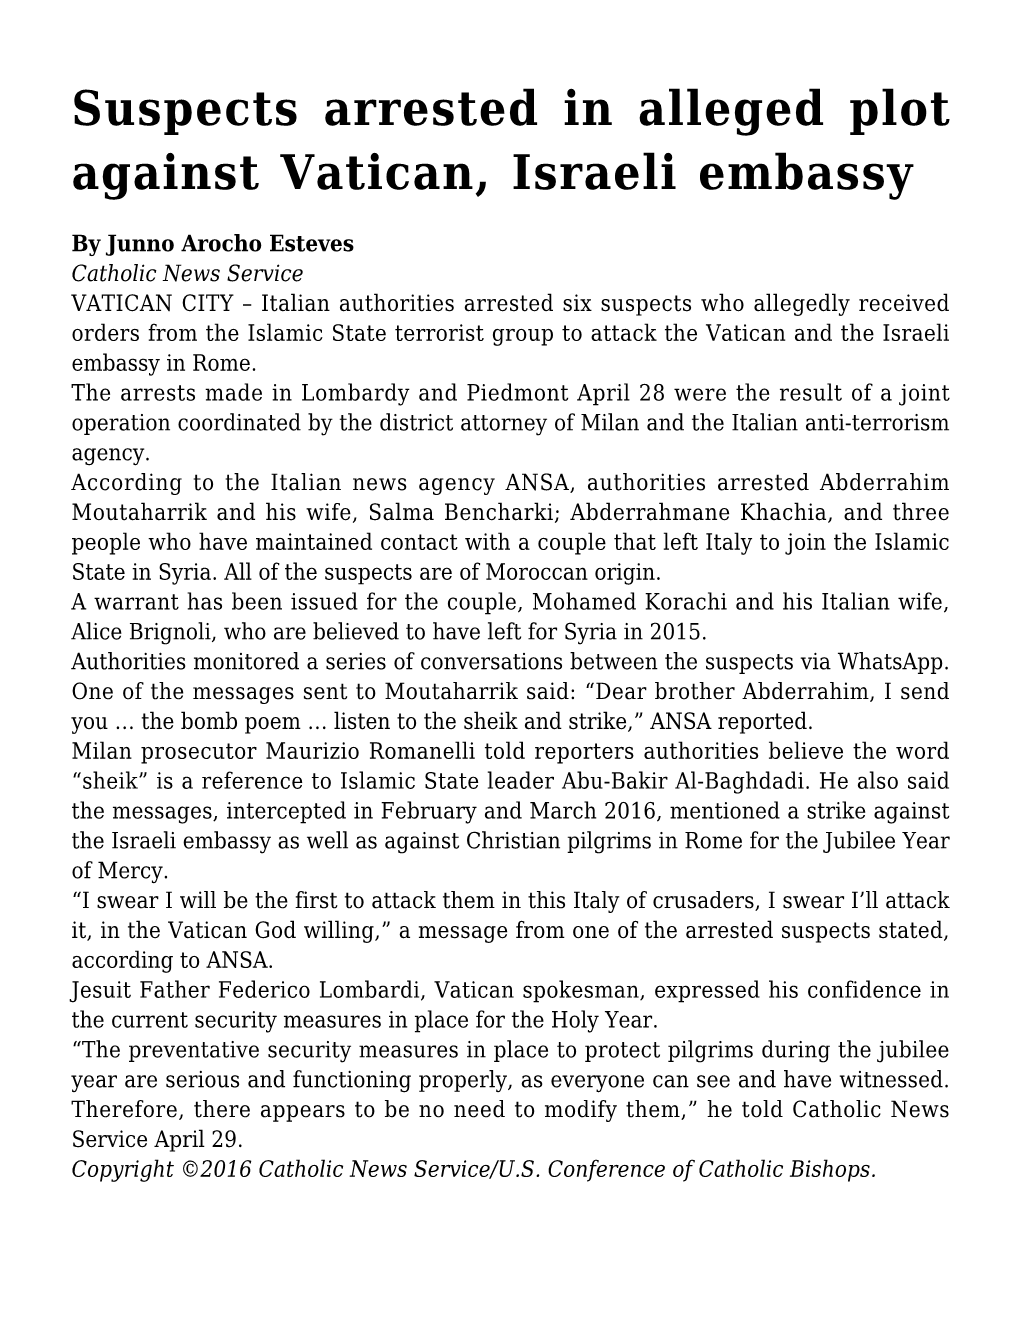 Suspects Arrested in Alleged Plot Against Vatican, Israeli Embassy